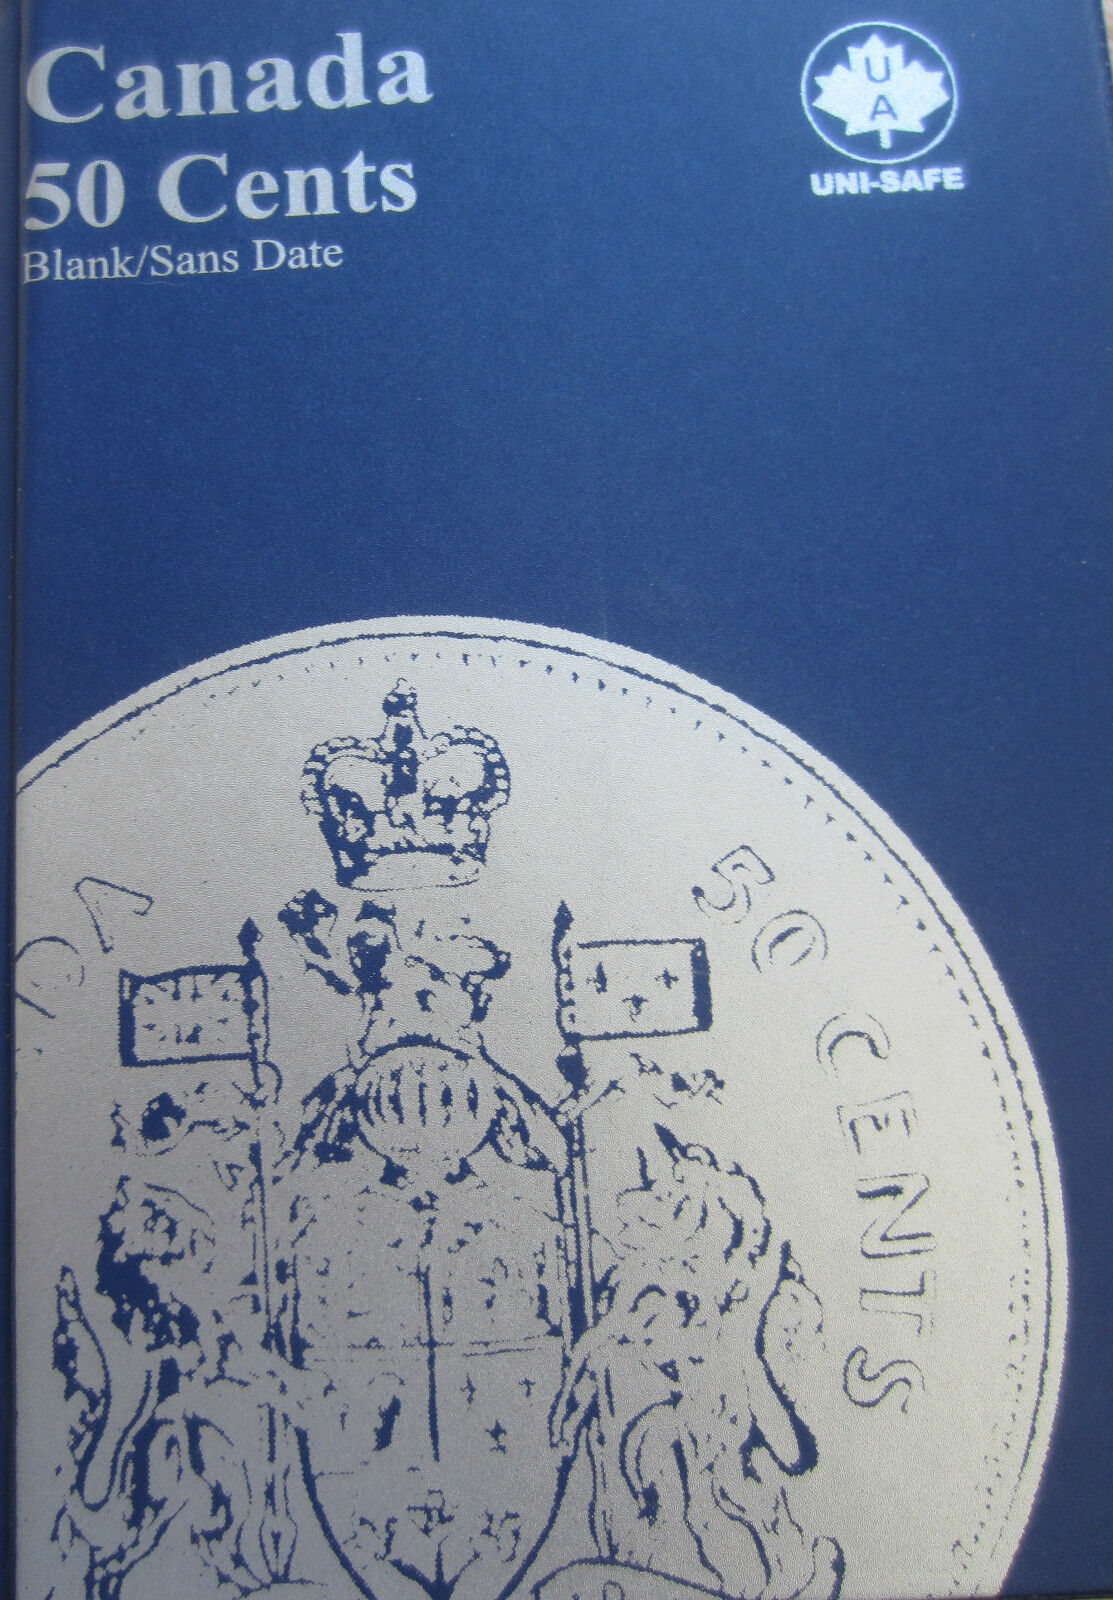 Complete Set of Canada Half Dollars Coins (1968-2015) In UNI-Safe Blue Book